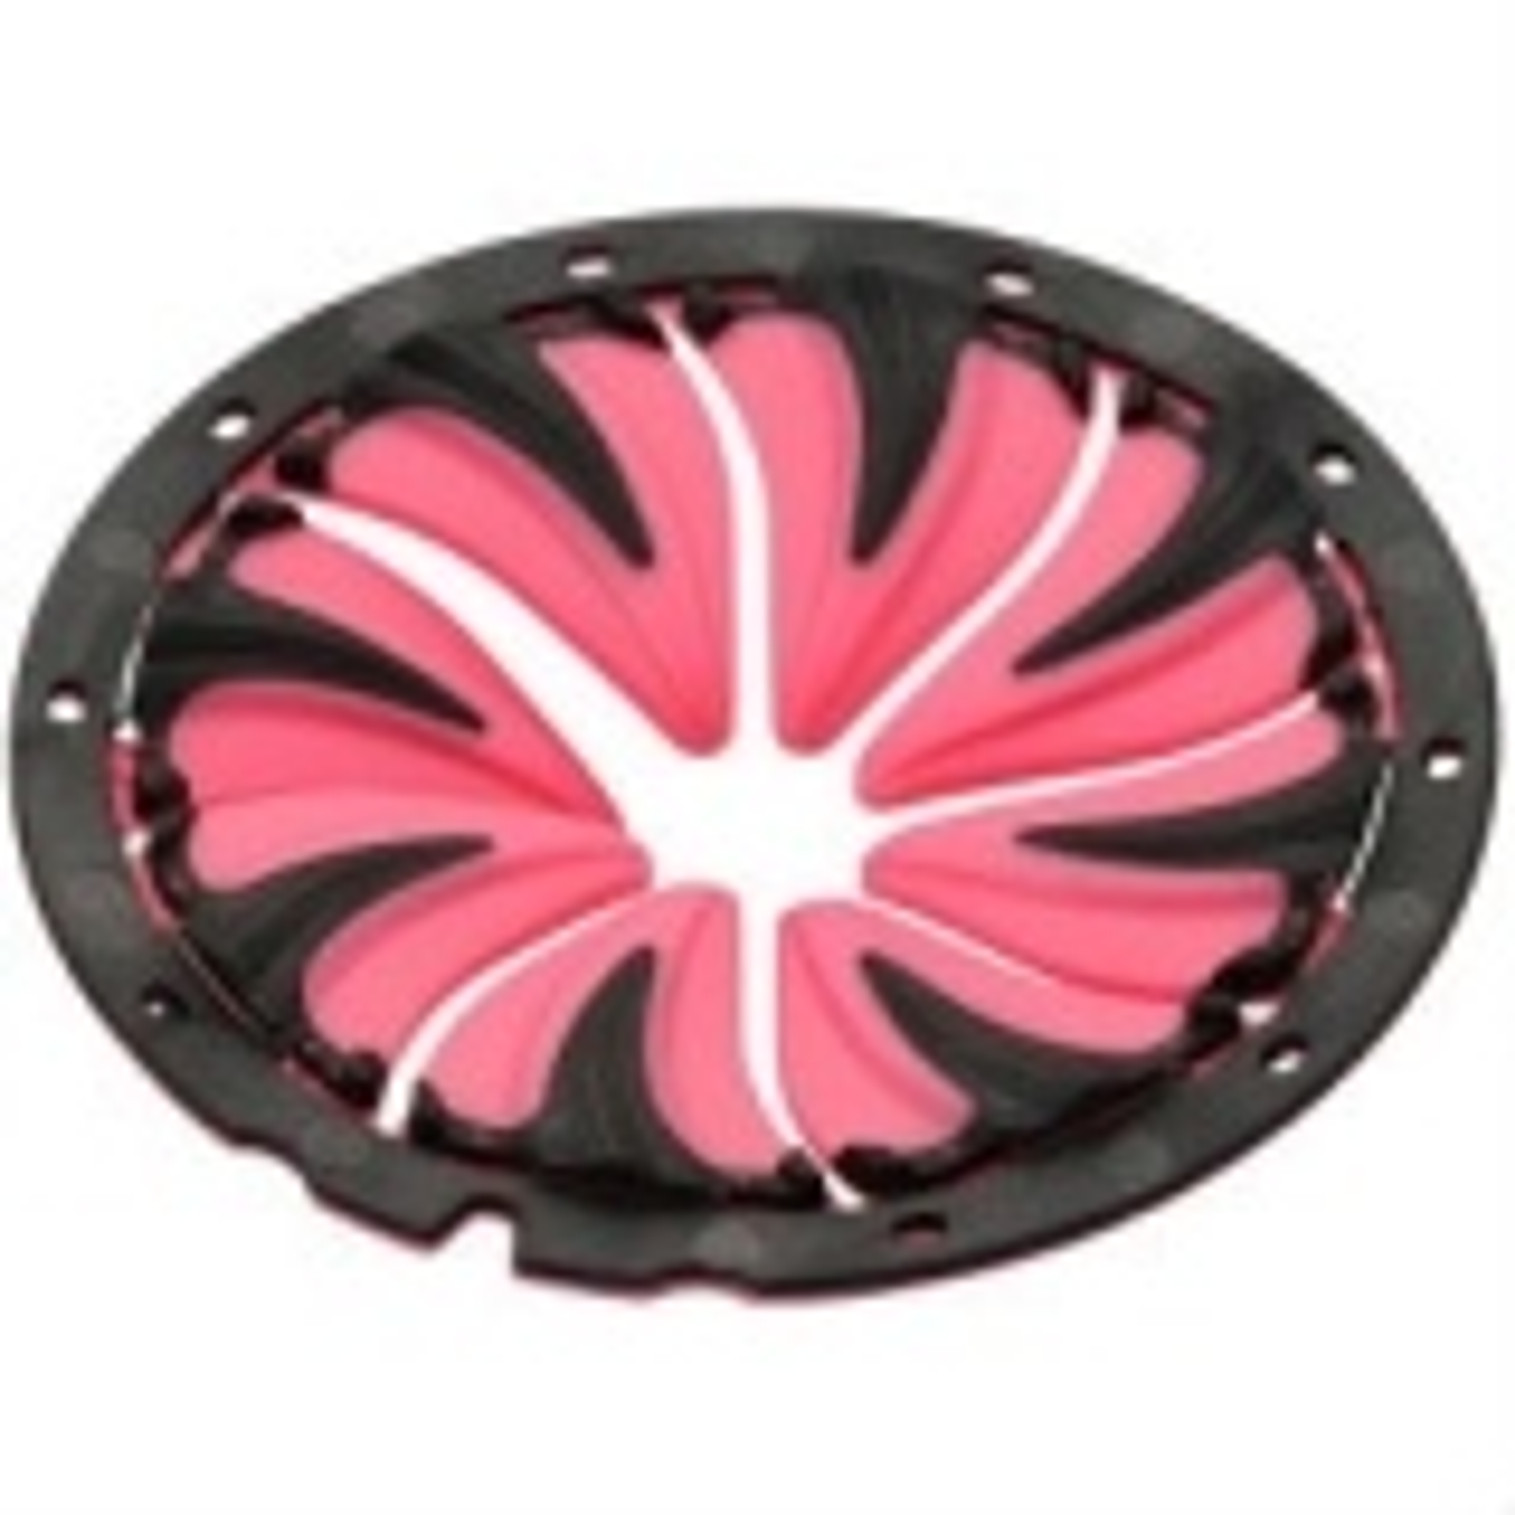 Dye Rotor Paintball Loader Quick Feed - Pink/Black